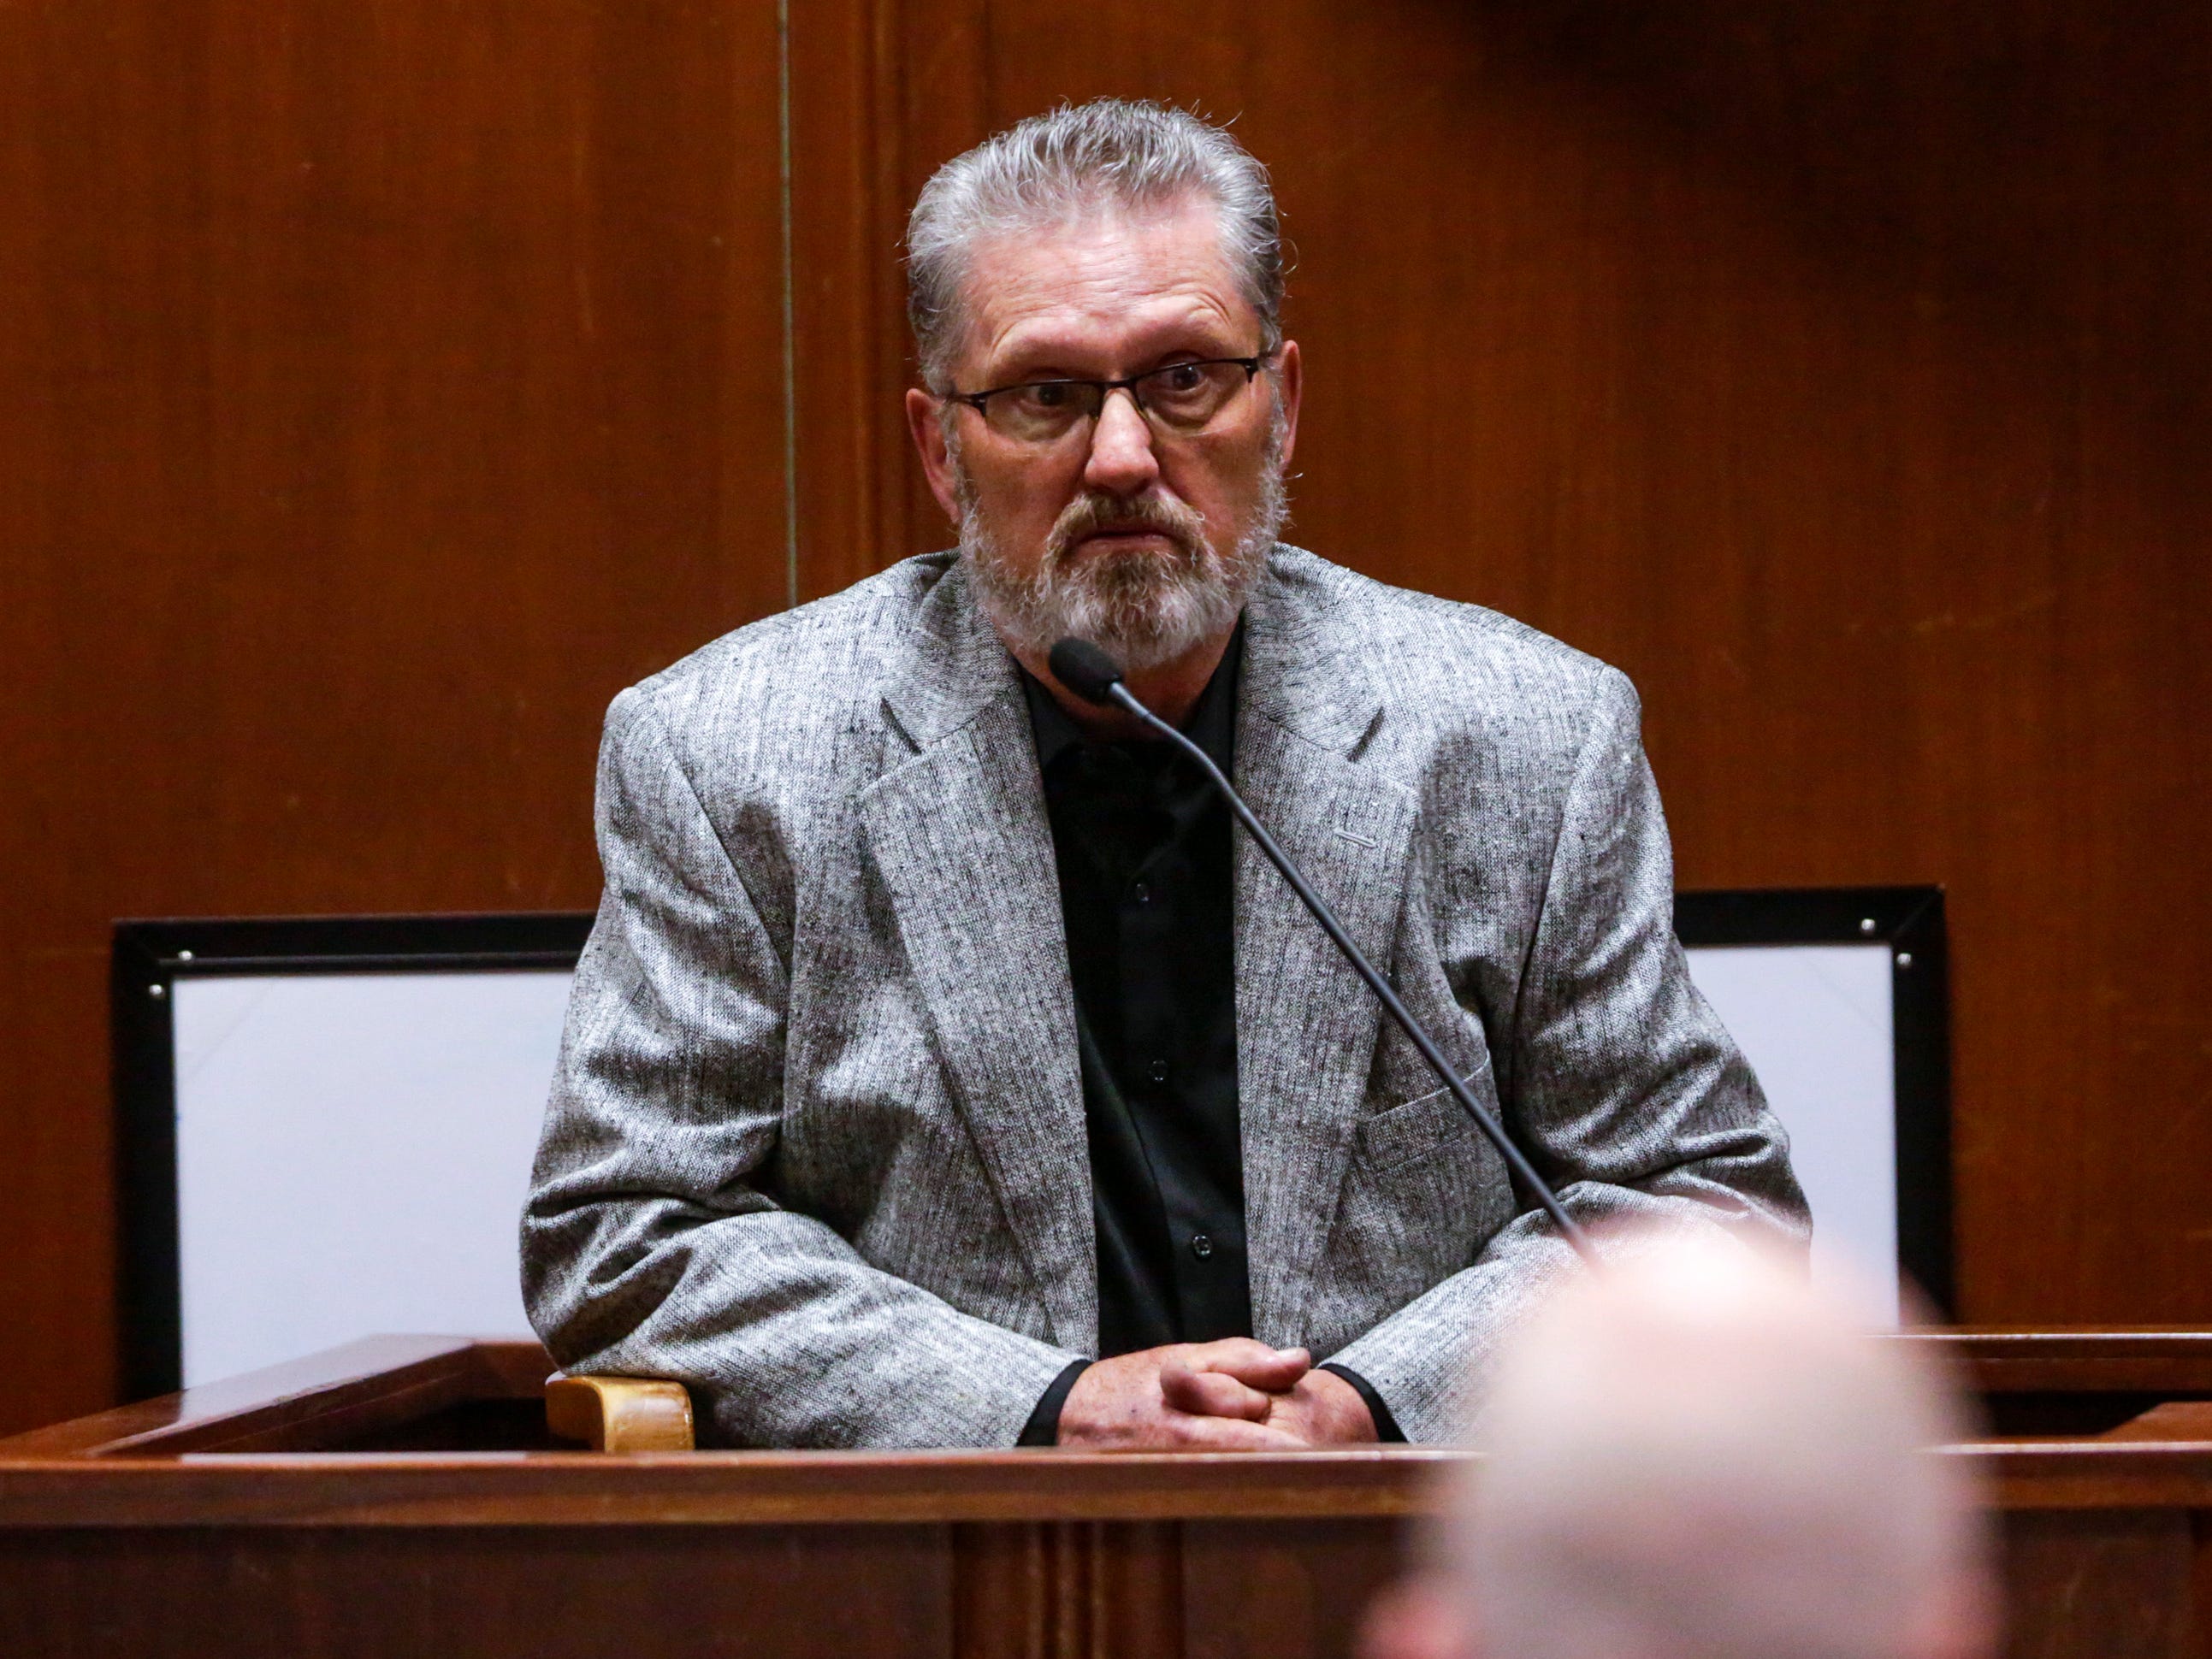 Merlin Winckler of Collinsville, Virginia, testifies during trial at the Scott County Courthouse in Davenport on Wednesday, Feb. 12, 2020. Winckler, who attended high school with Michell Martinko, ran into at Westdale Mall the night she was killed.